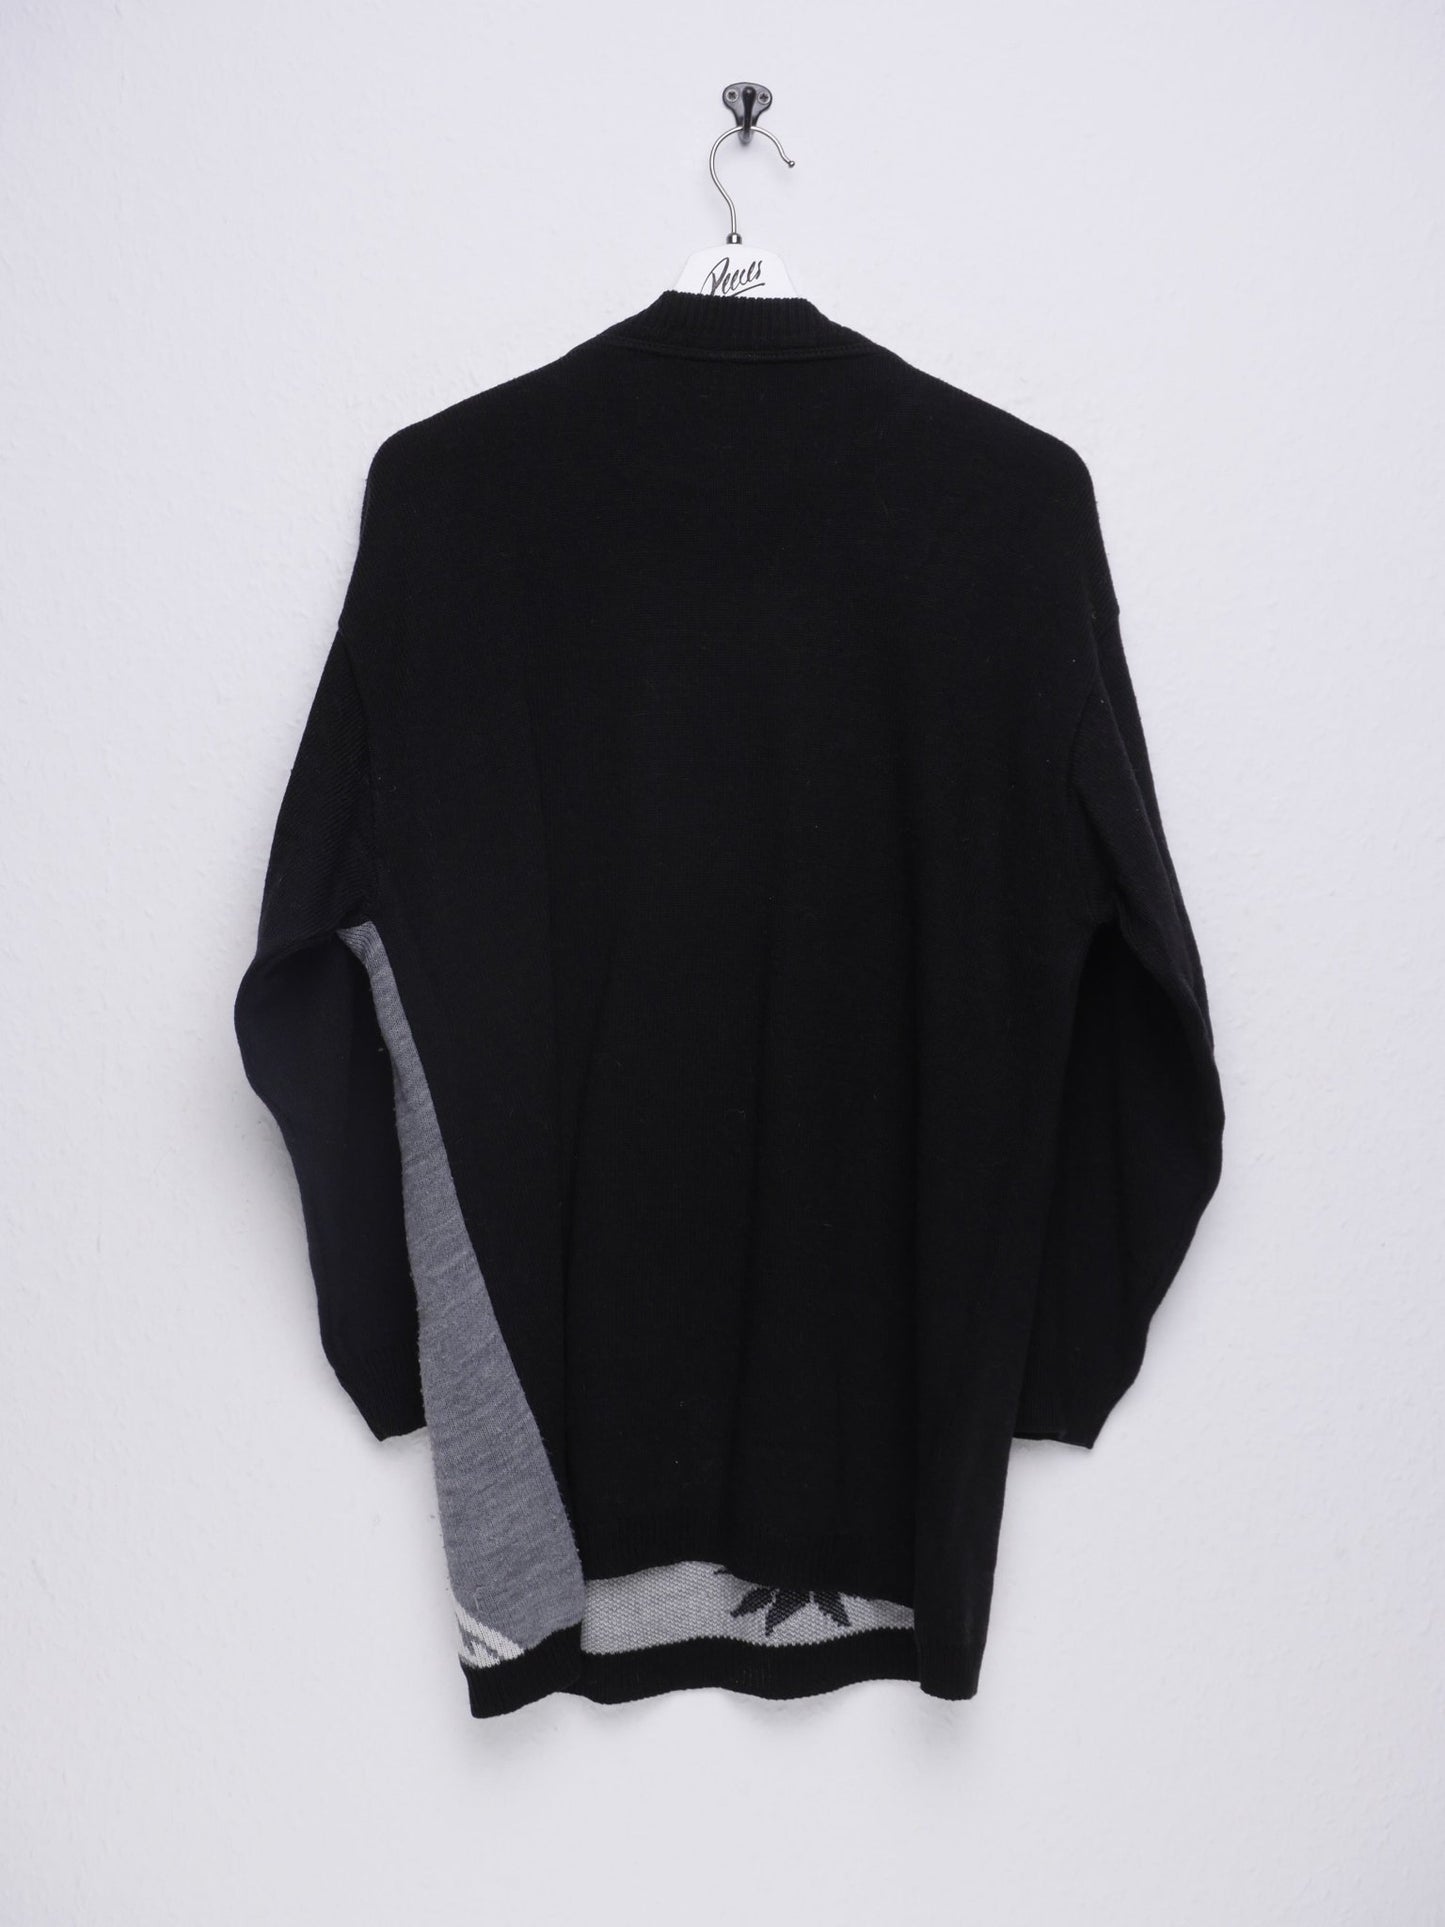 knitted patterned black Vintage Sweater - Peeces